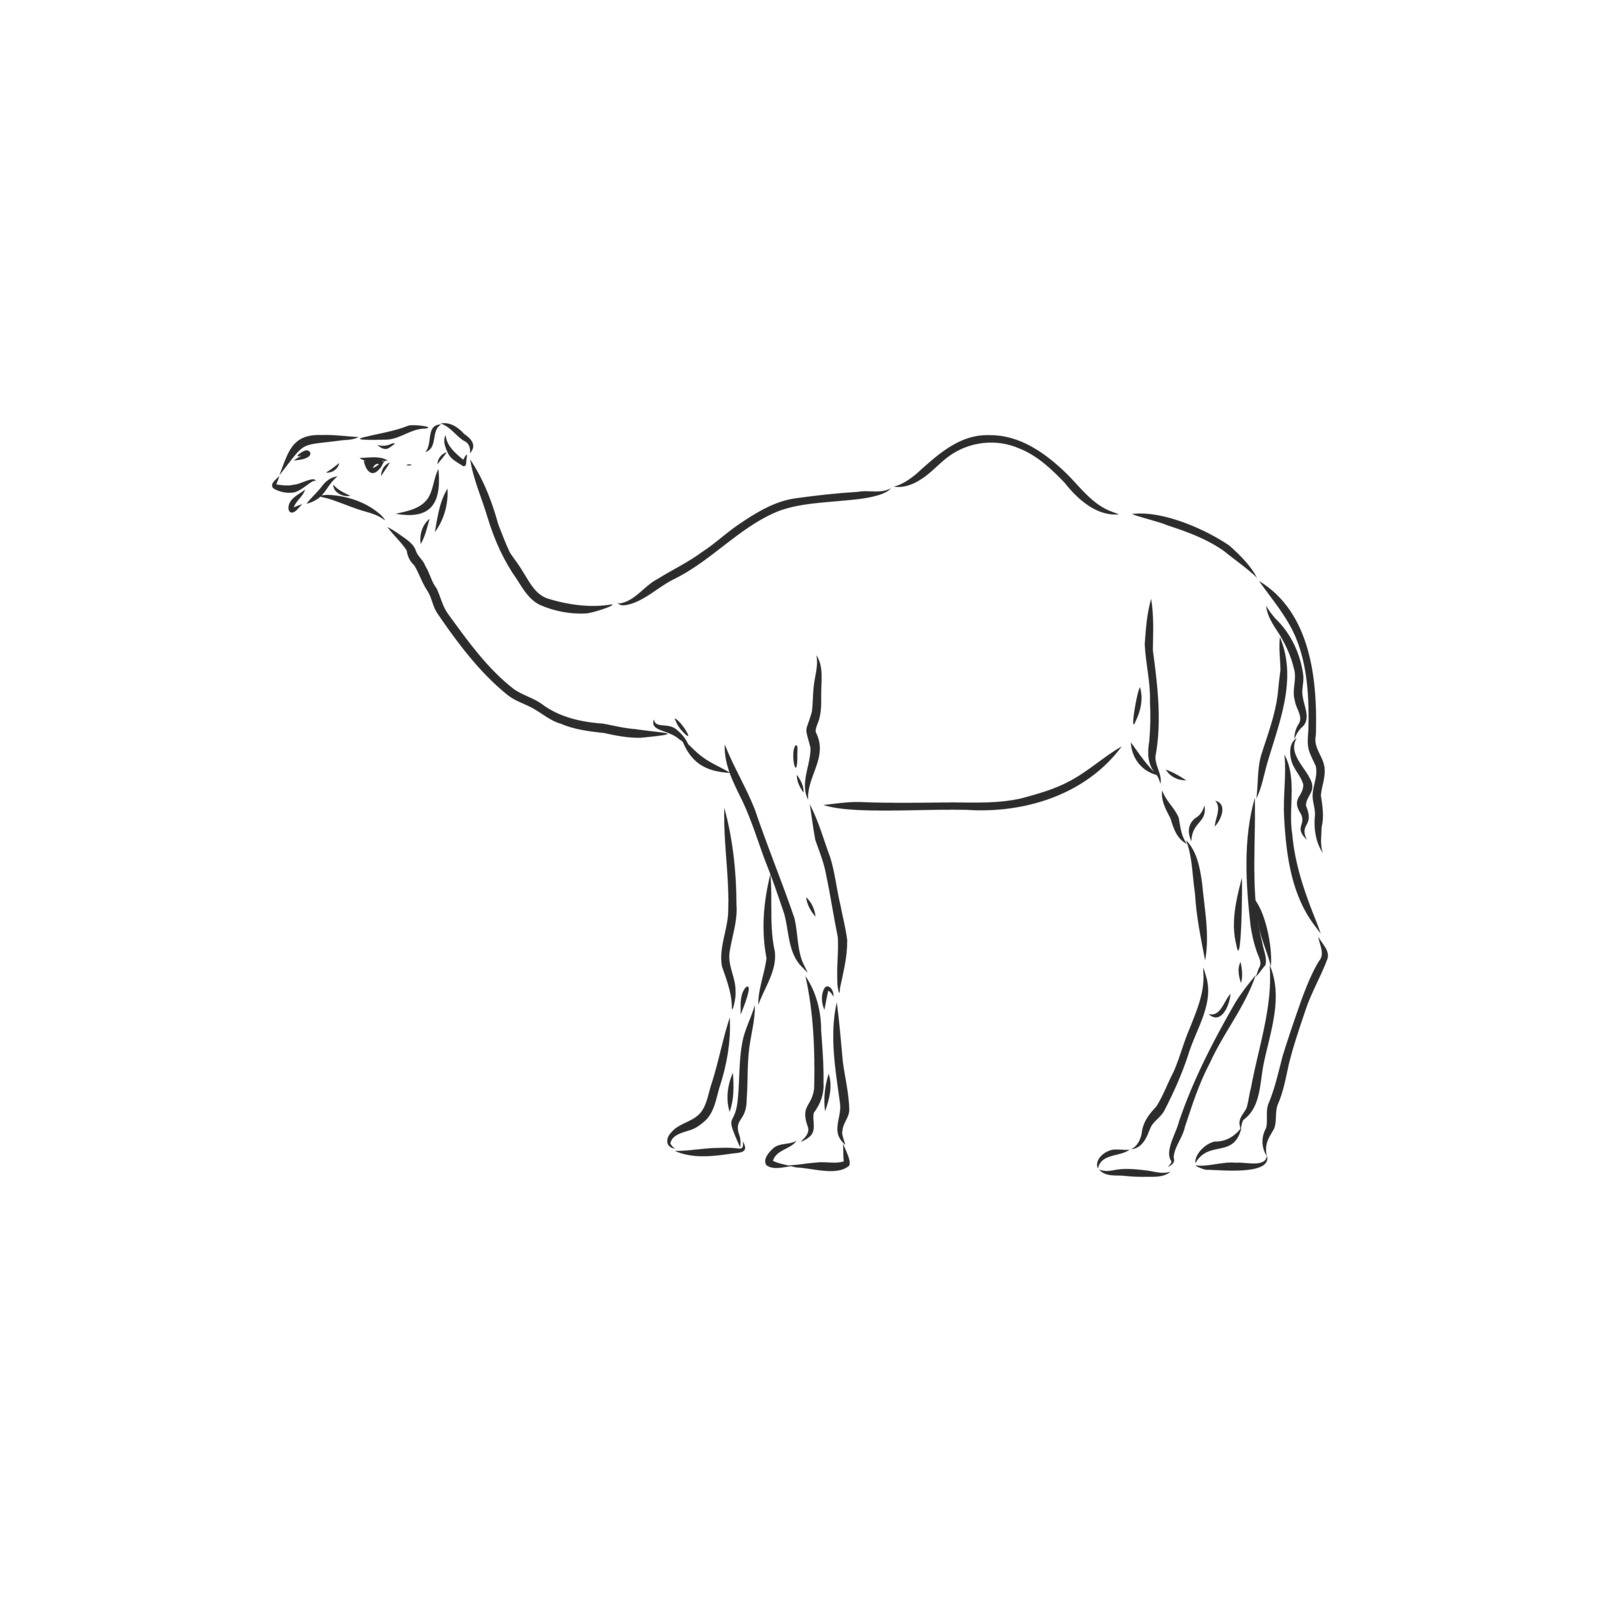 Camel. Hand drawn vector illustration. Can be used separately from your design. camel vector sketch illustration by ekaterina